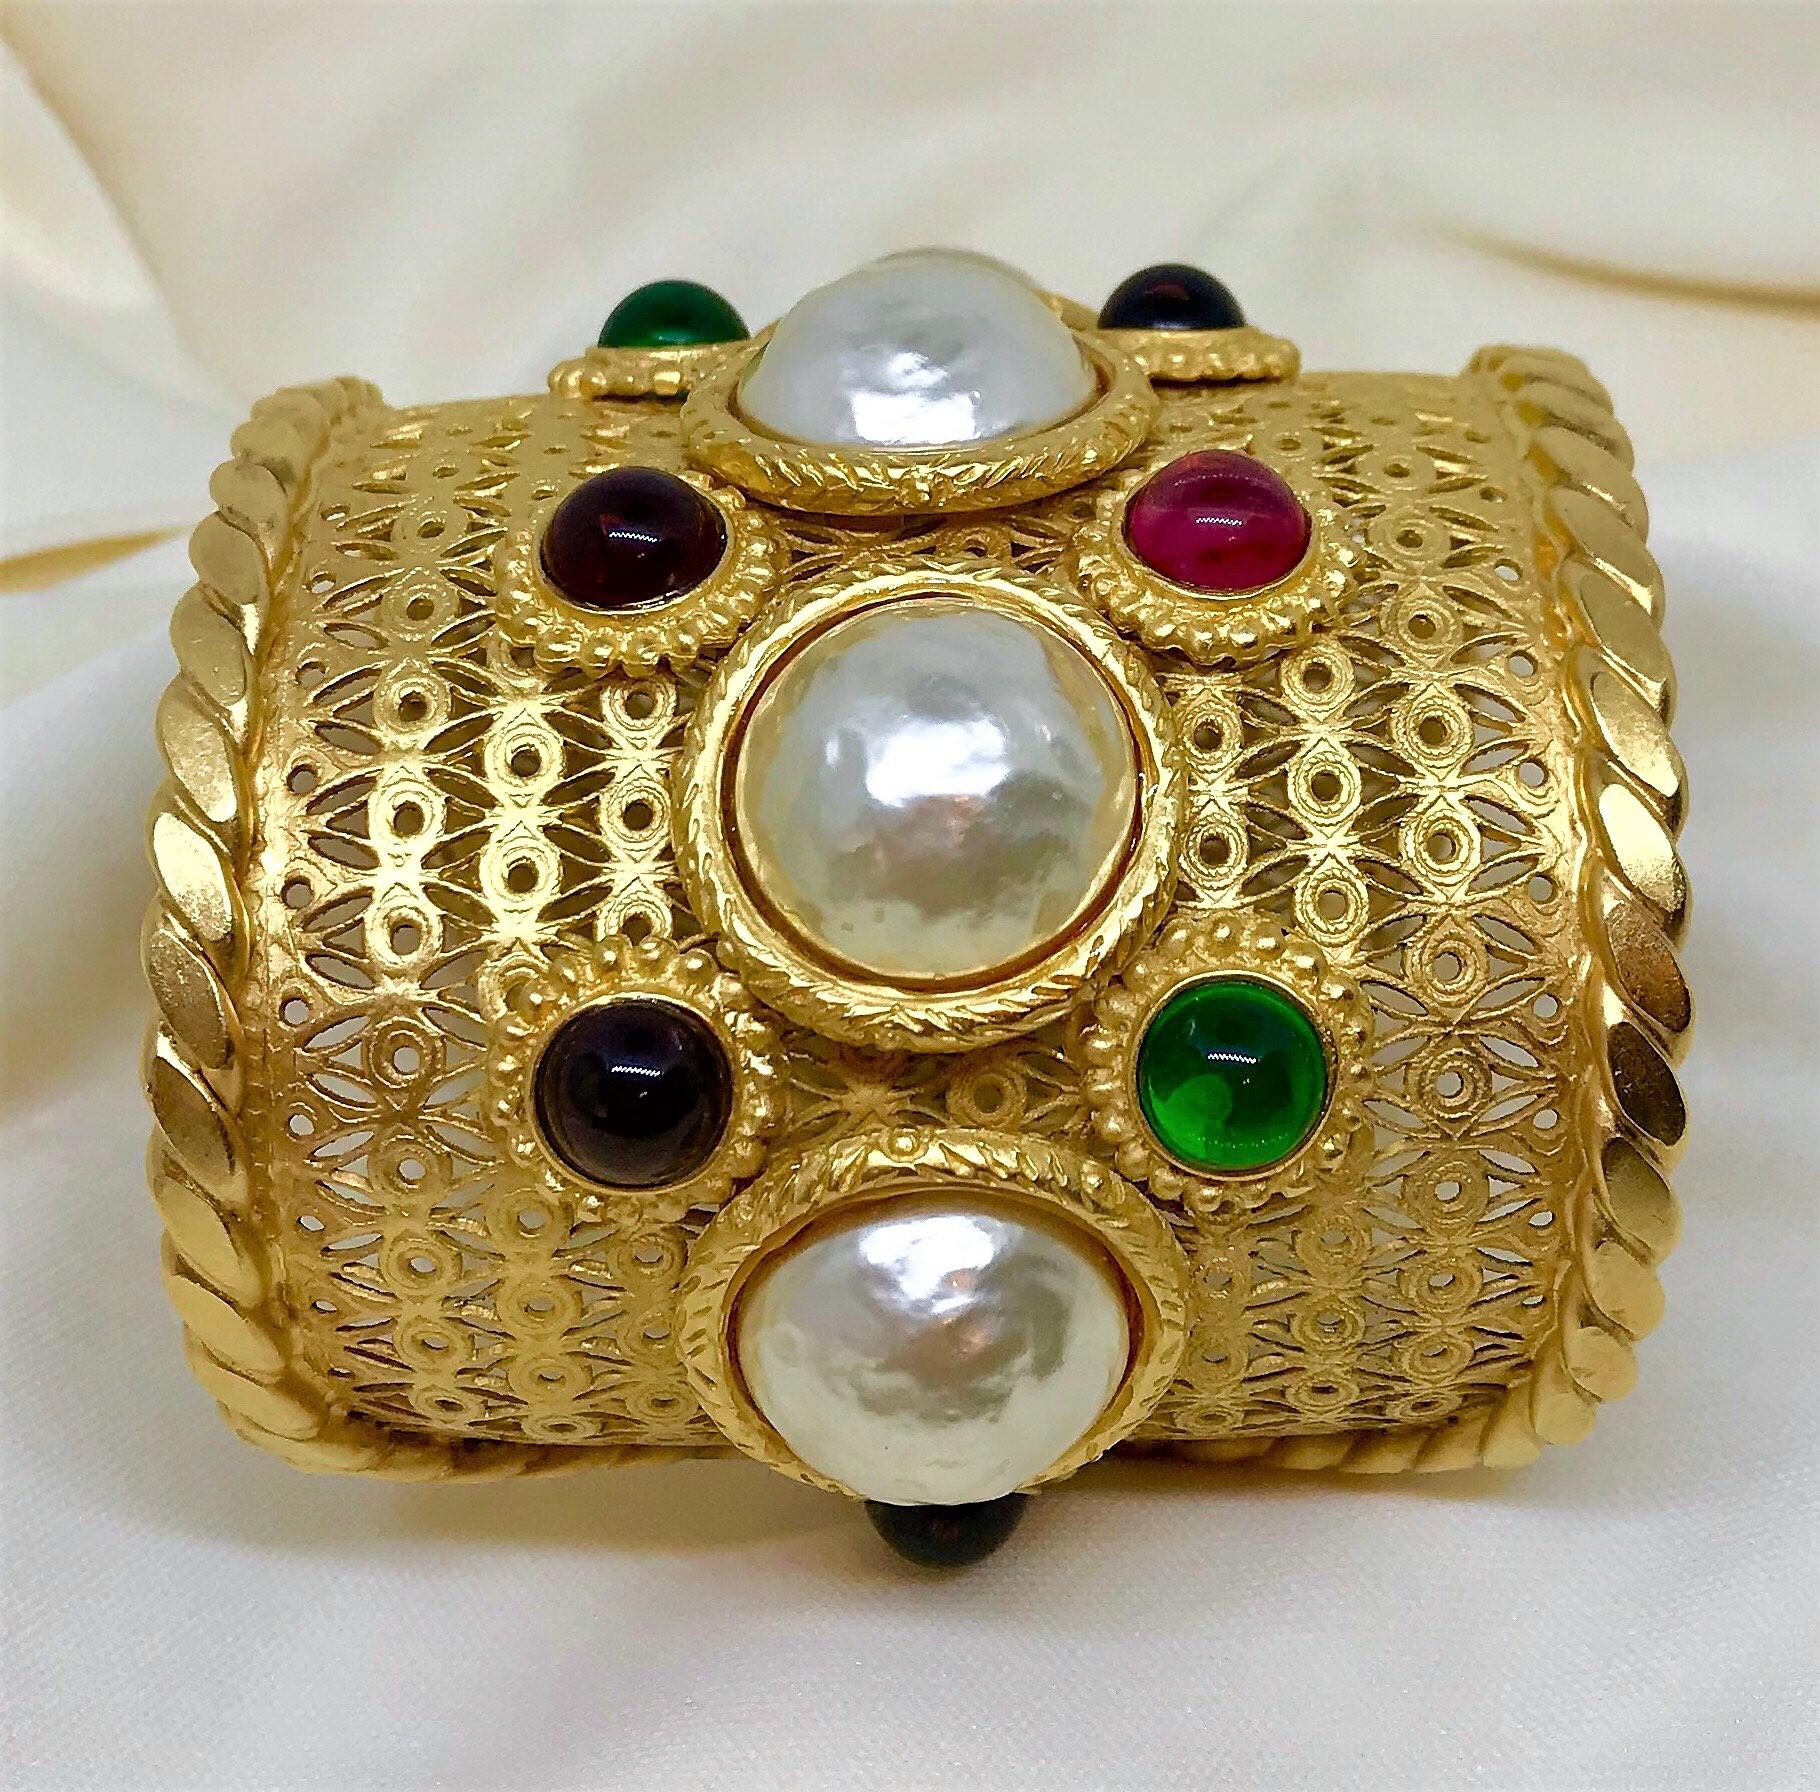 Circa 1980s Deanna Hamro Gold-Plated Faux-Pearl and  Cabochon Jeweled Cuff  im Zustand „Gut“ in Long Beach, CA